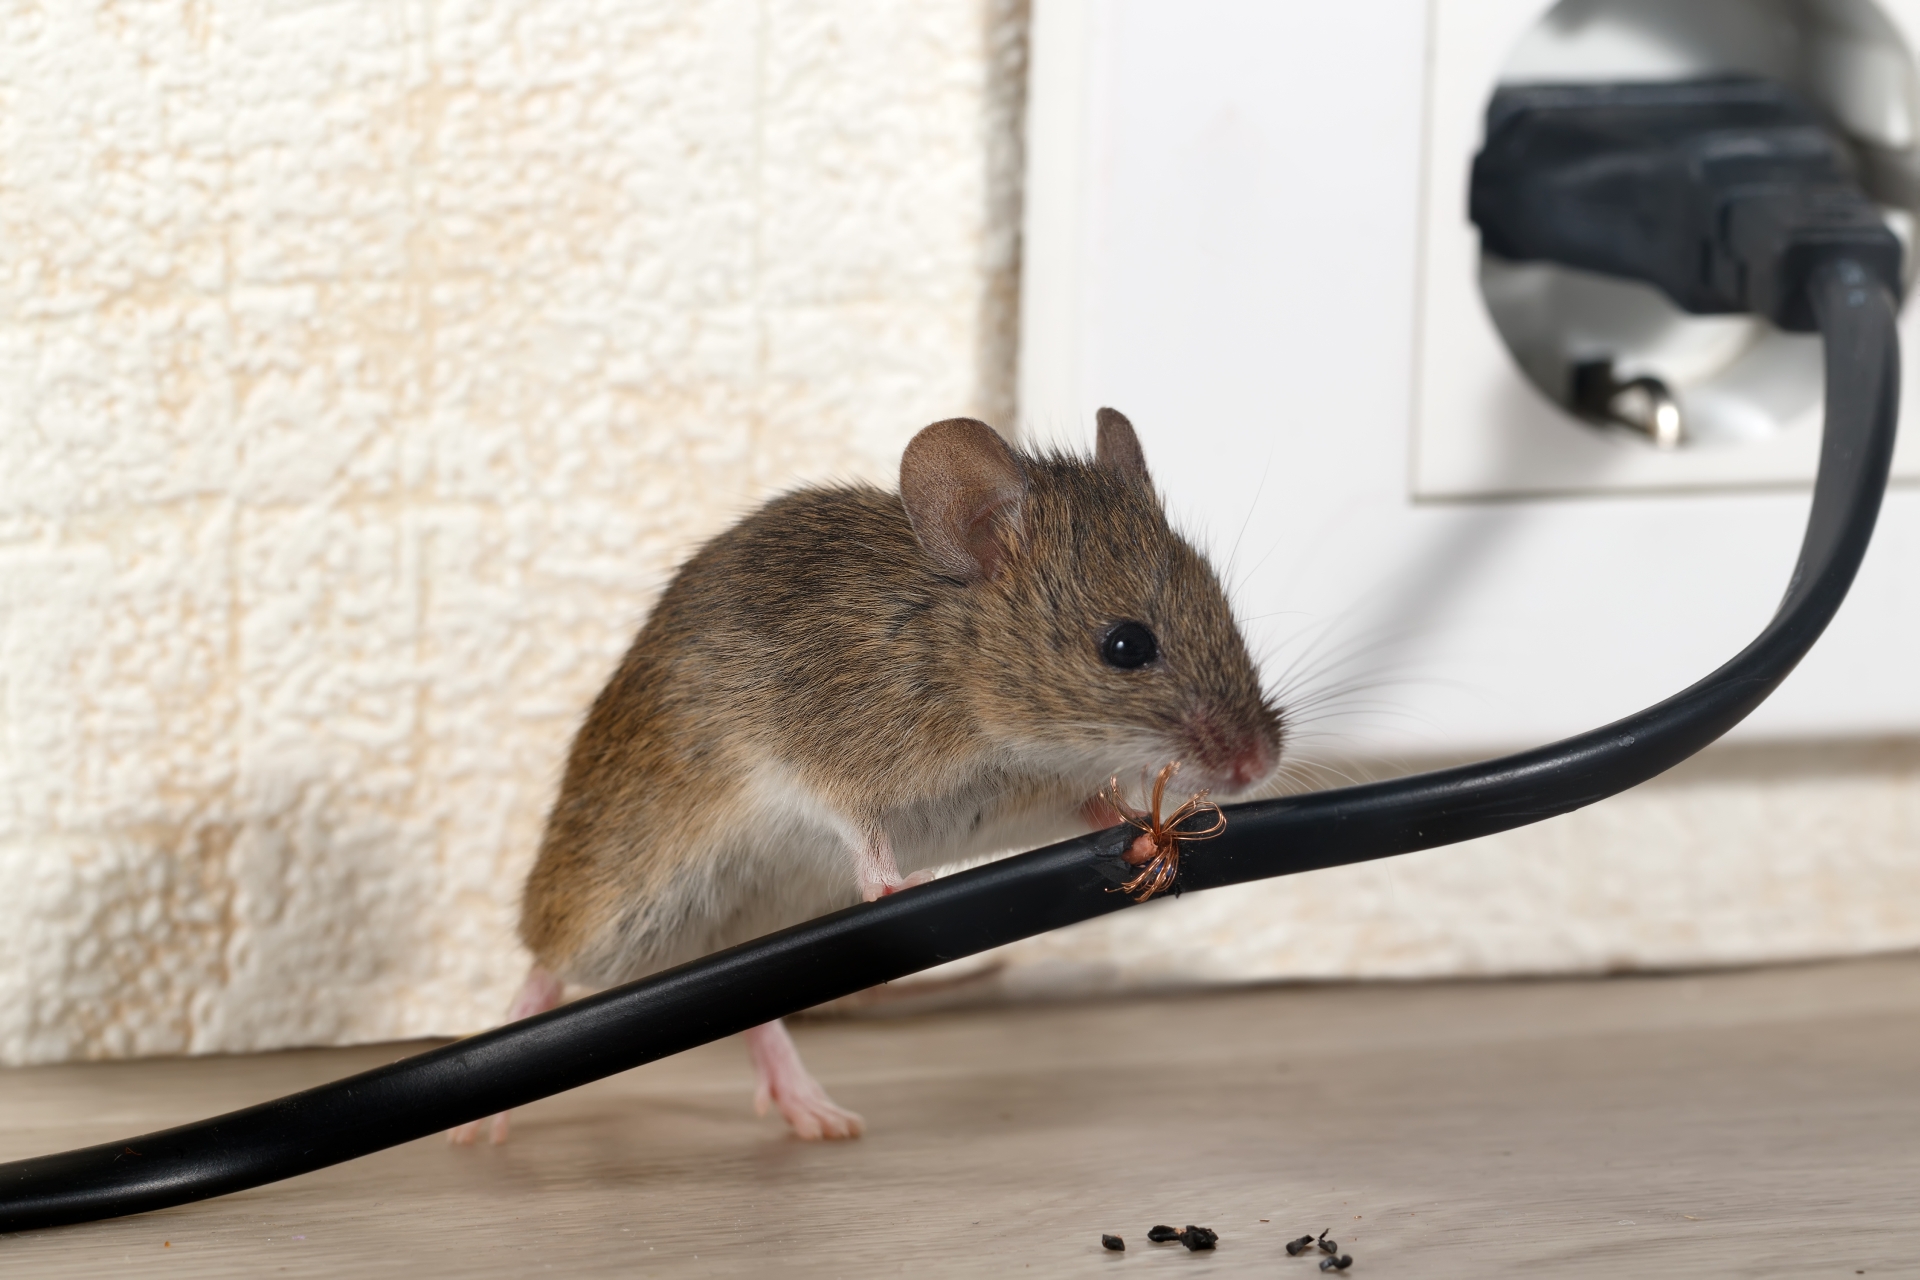 Mice Infestation, Pest Control in East Sheen, SW14. Call Now 020 8166 9746